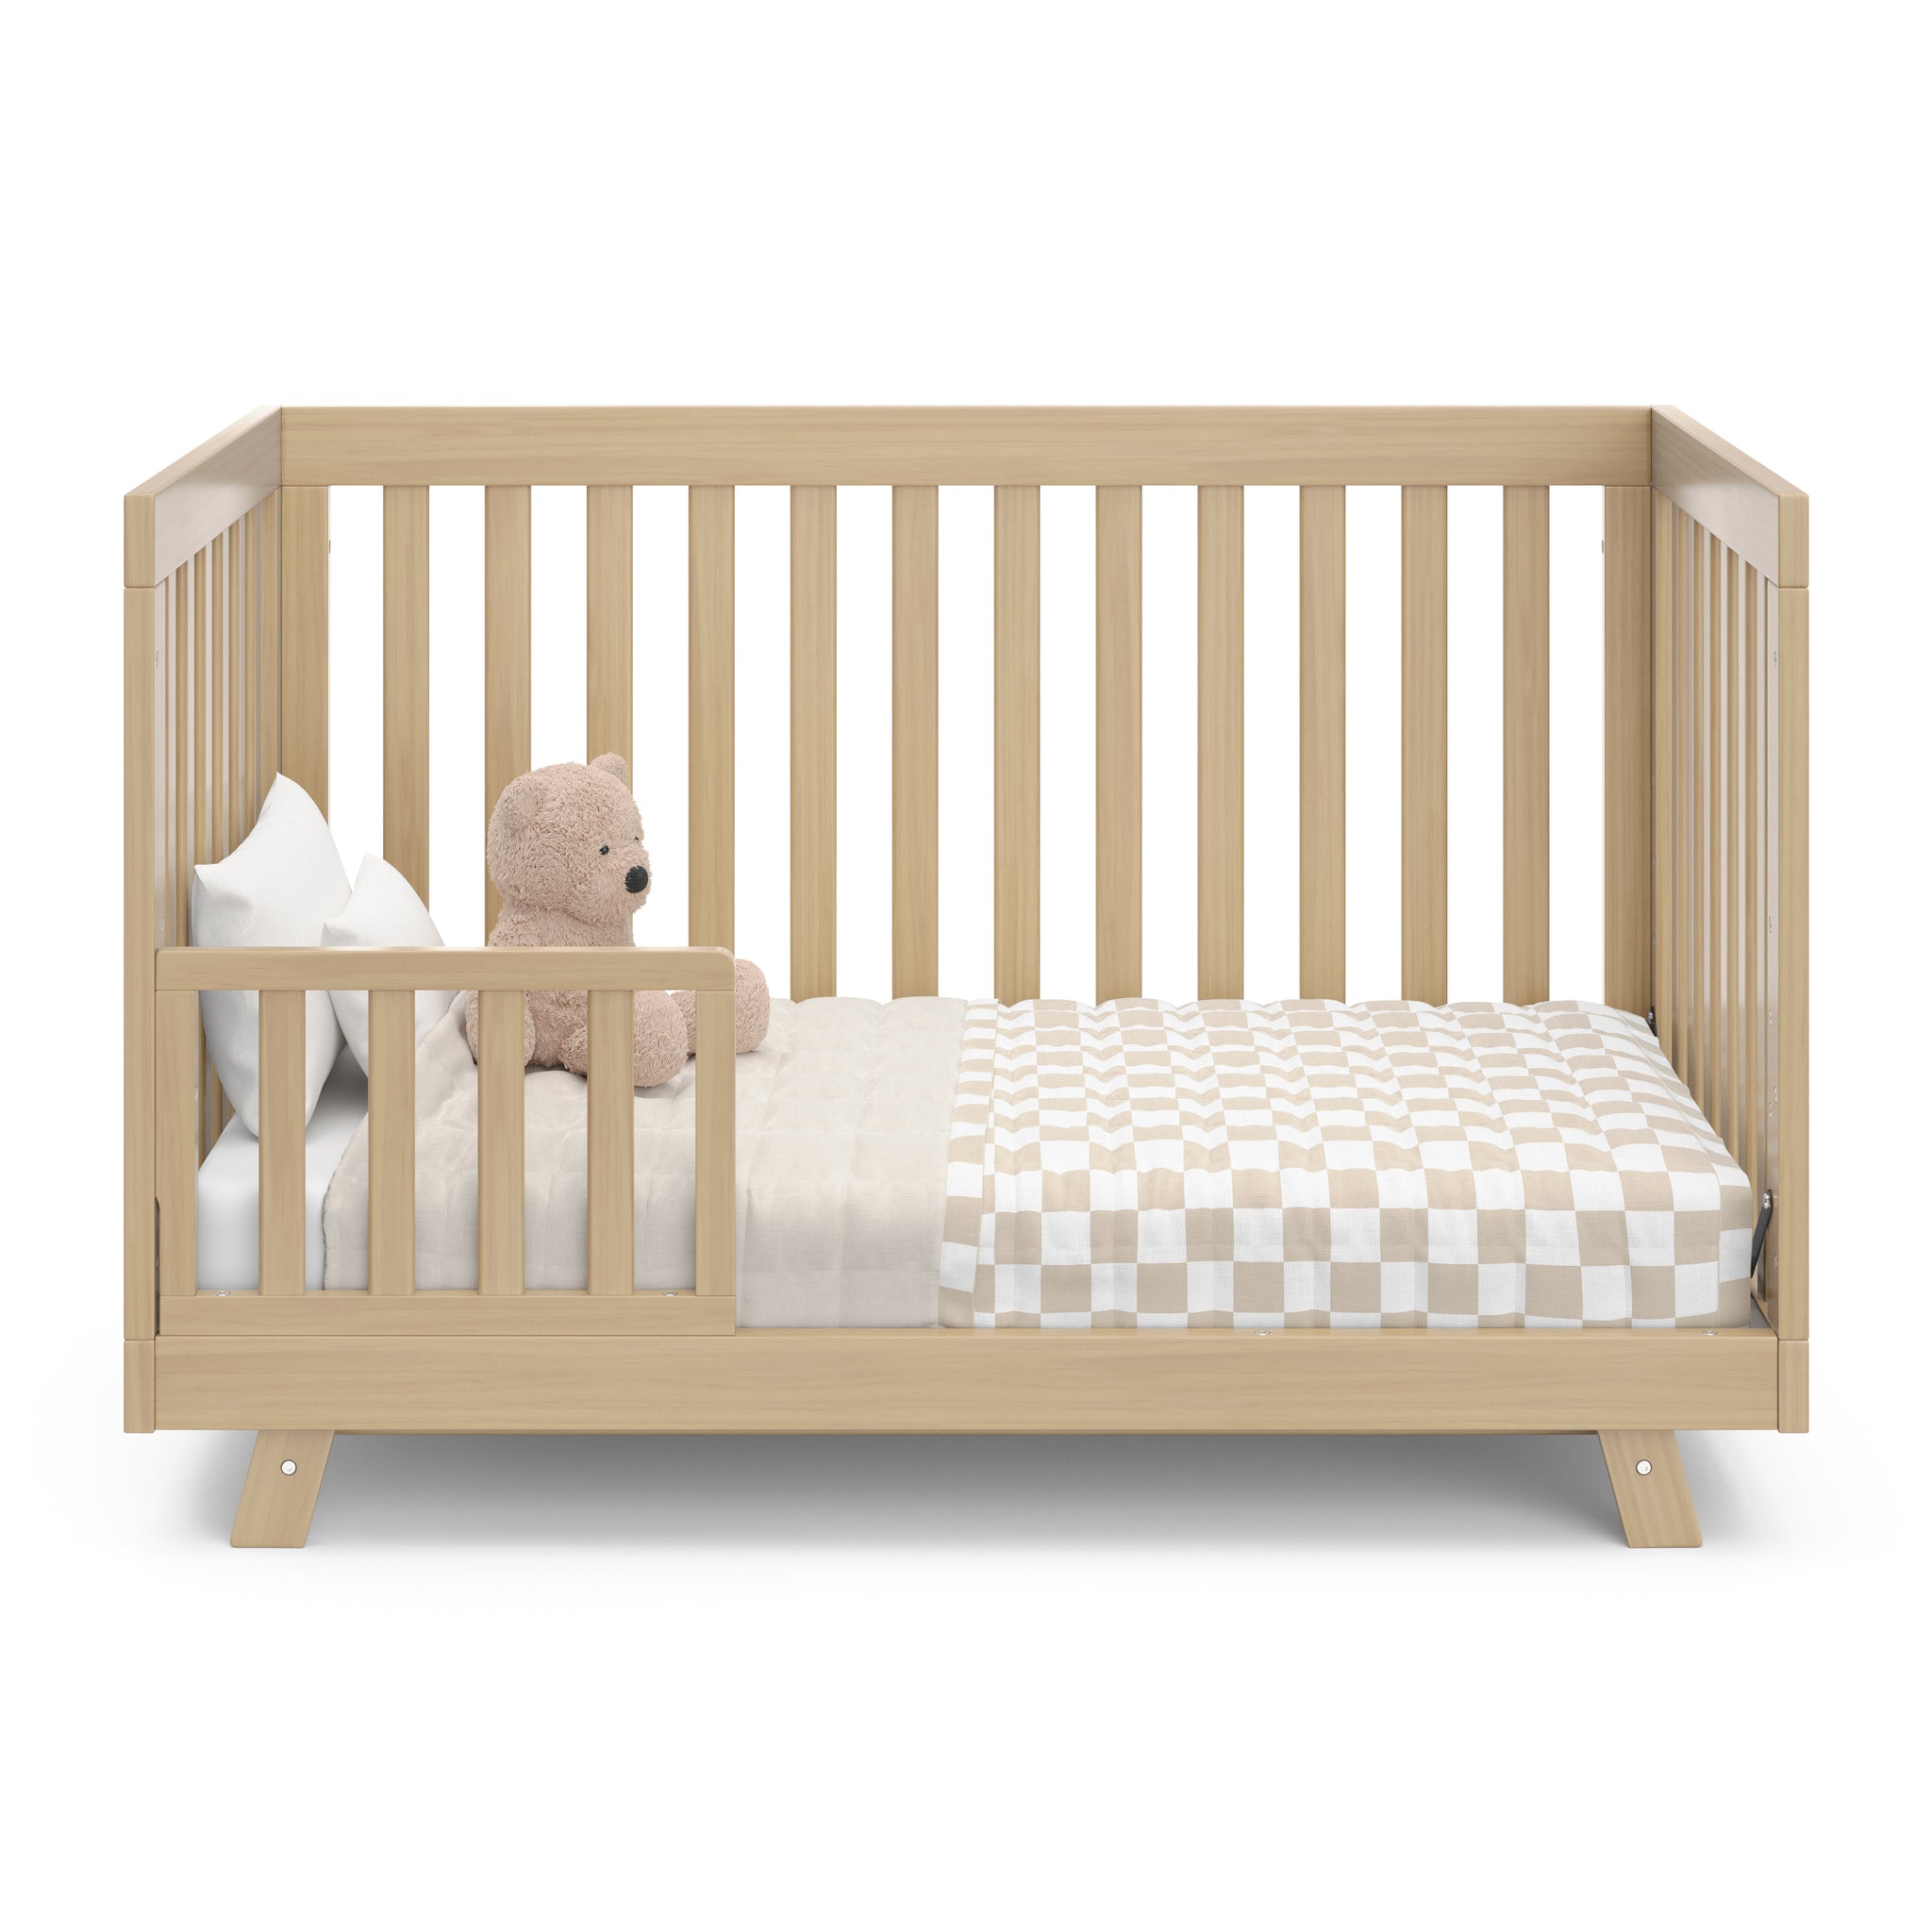 Front view of Driftwood Crib in toddler conversion with one guardrail